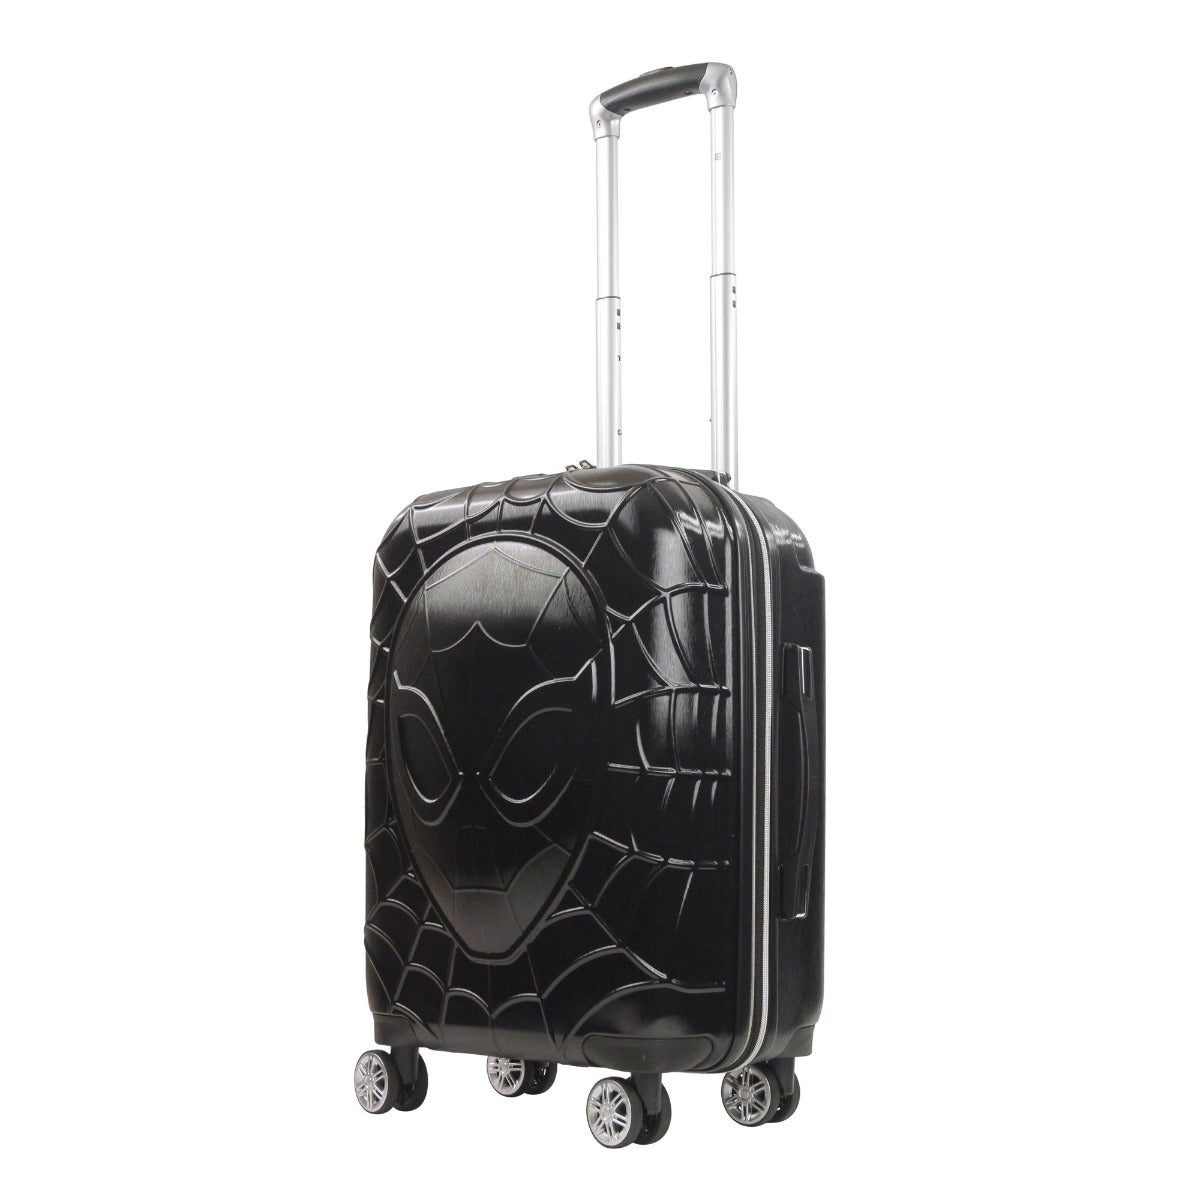 Marvel Kids Suitcase for Boys Foldable Trolley Hand Luggage Bag Carry On  Avengers Travel Bag with Wheels Cabin Bag Wheeled Bag with Handle Spiderman